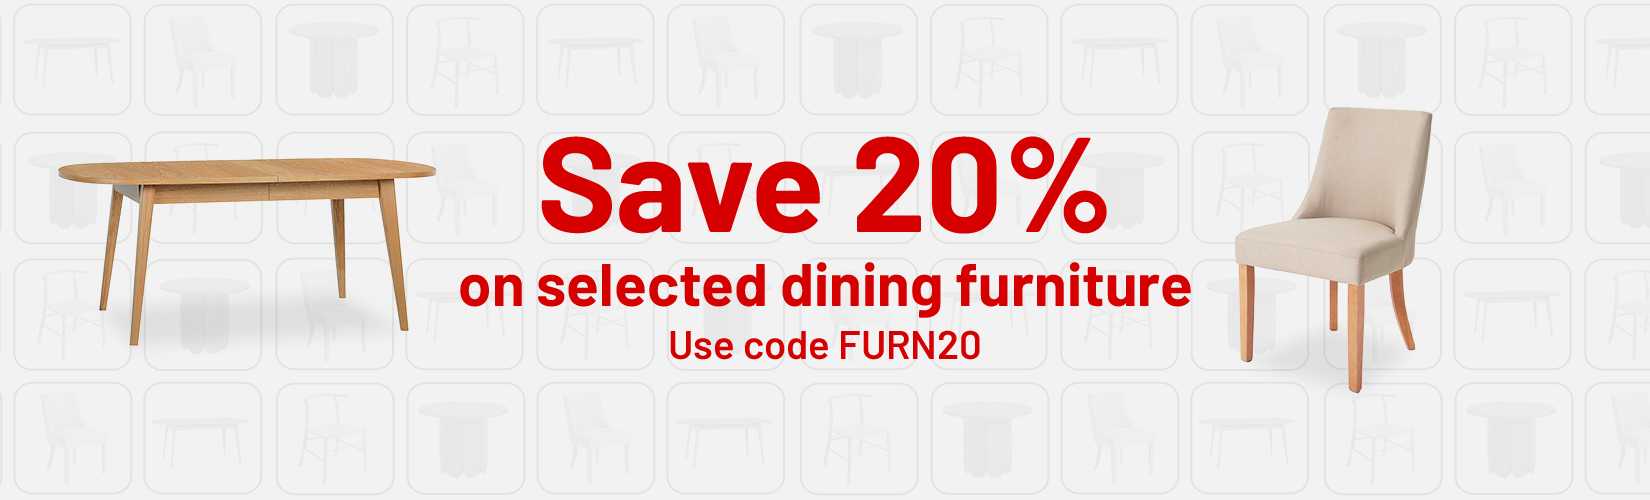 Save 20% on selected dining furniture. Use code FURN20.